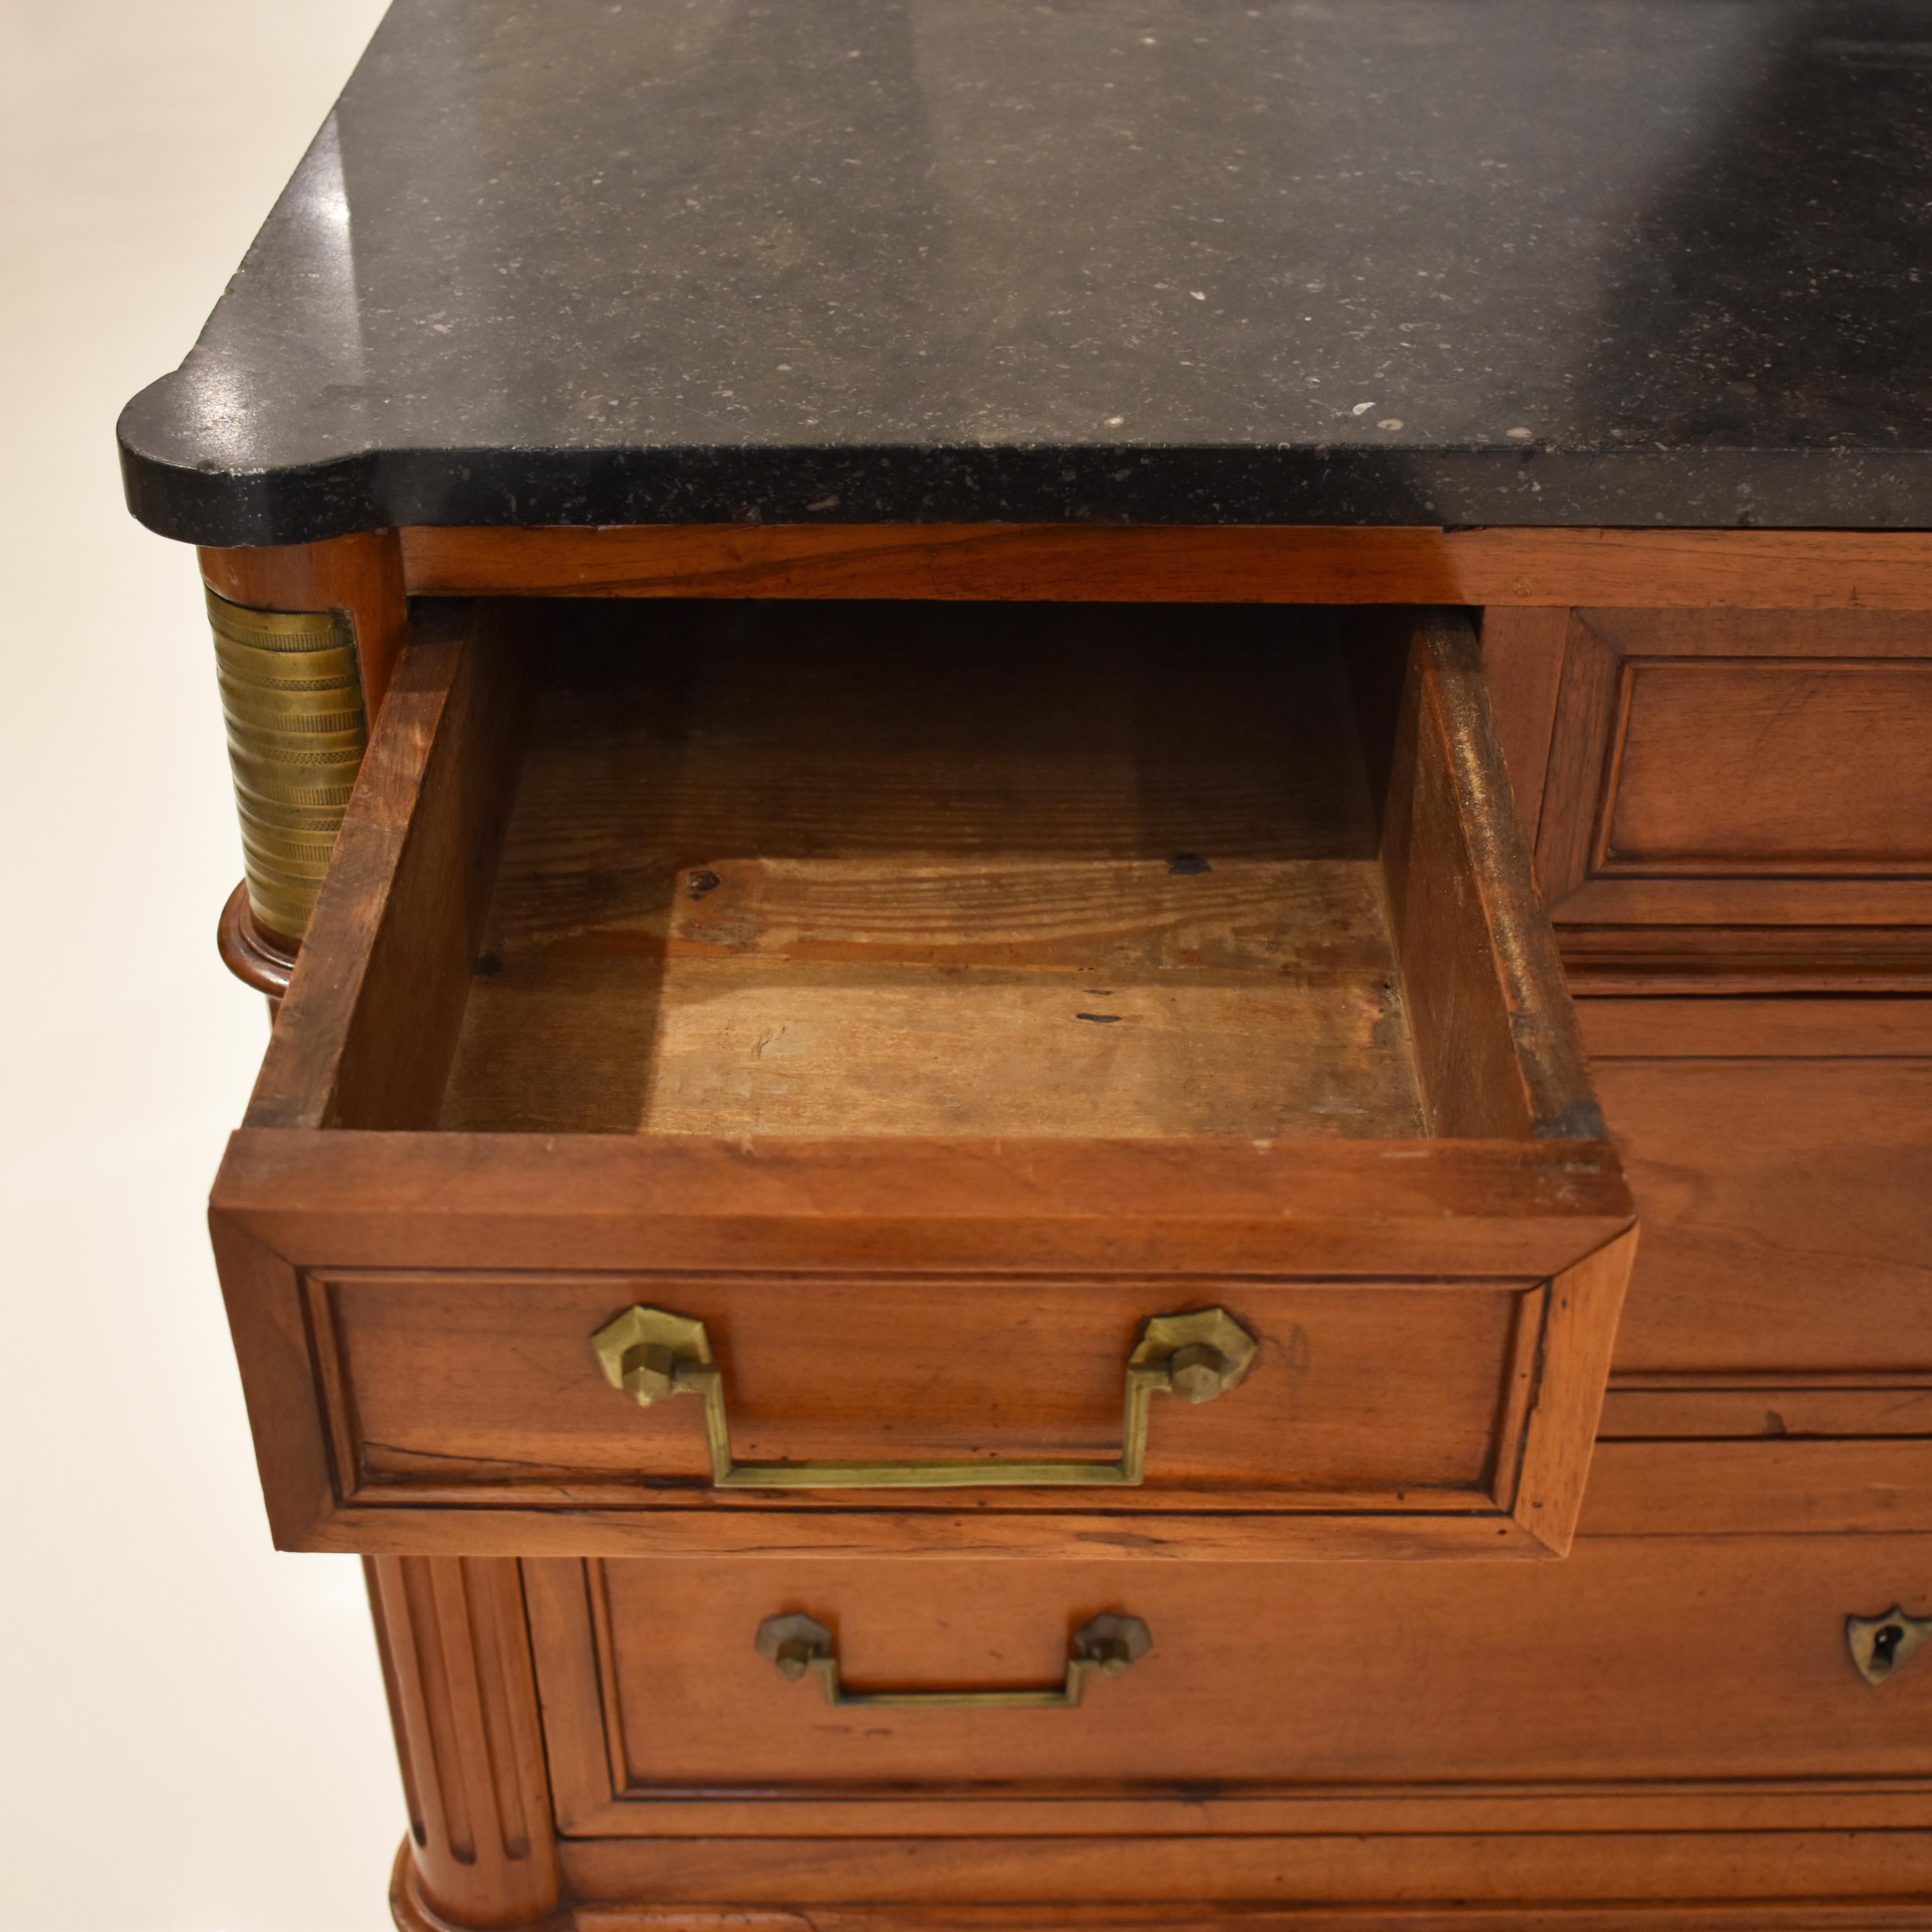 This 19c French Louis XVI style walnut commode with marble top has classic line and tapered legs that allow it to work seamlessly in any decor. Bronze ormolu accent complete the look.